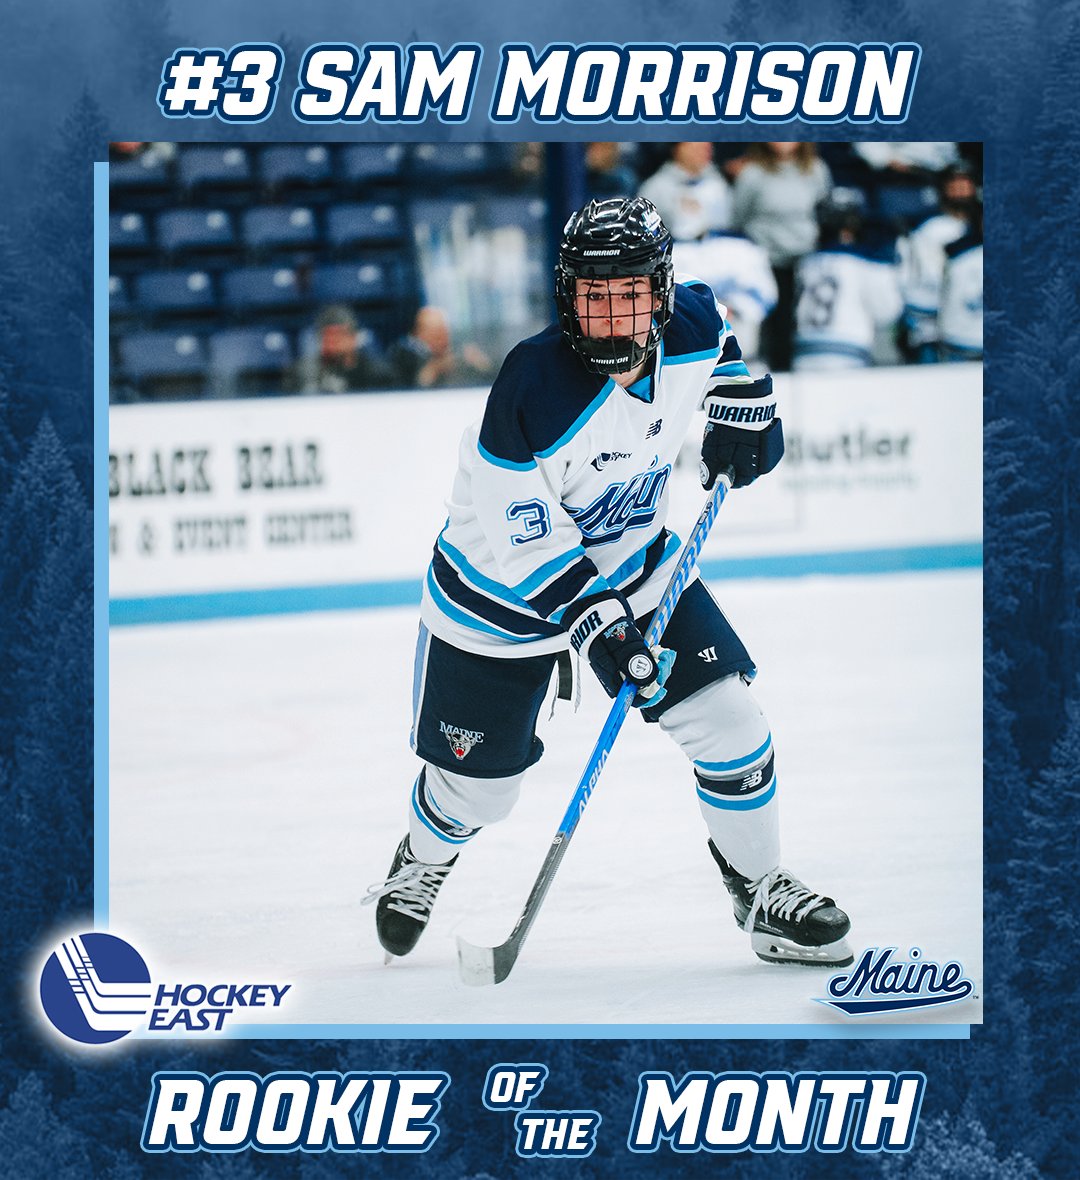 A strong finish to the season by Sam Morrison. Hockey East Rookie of the Month!